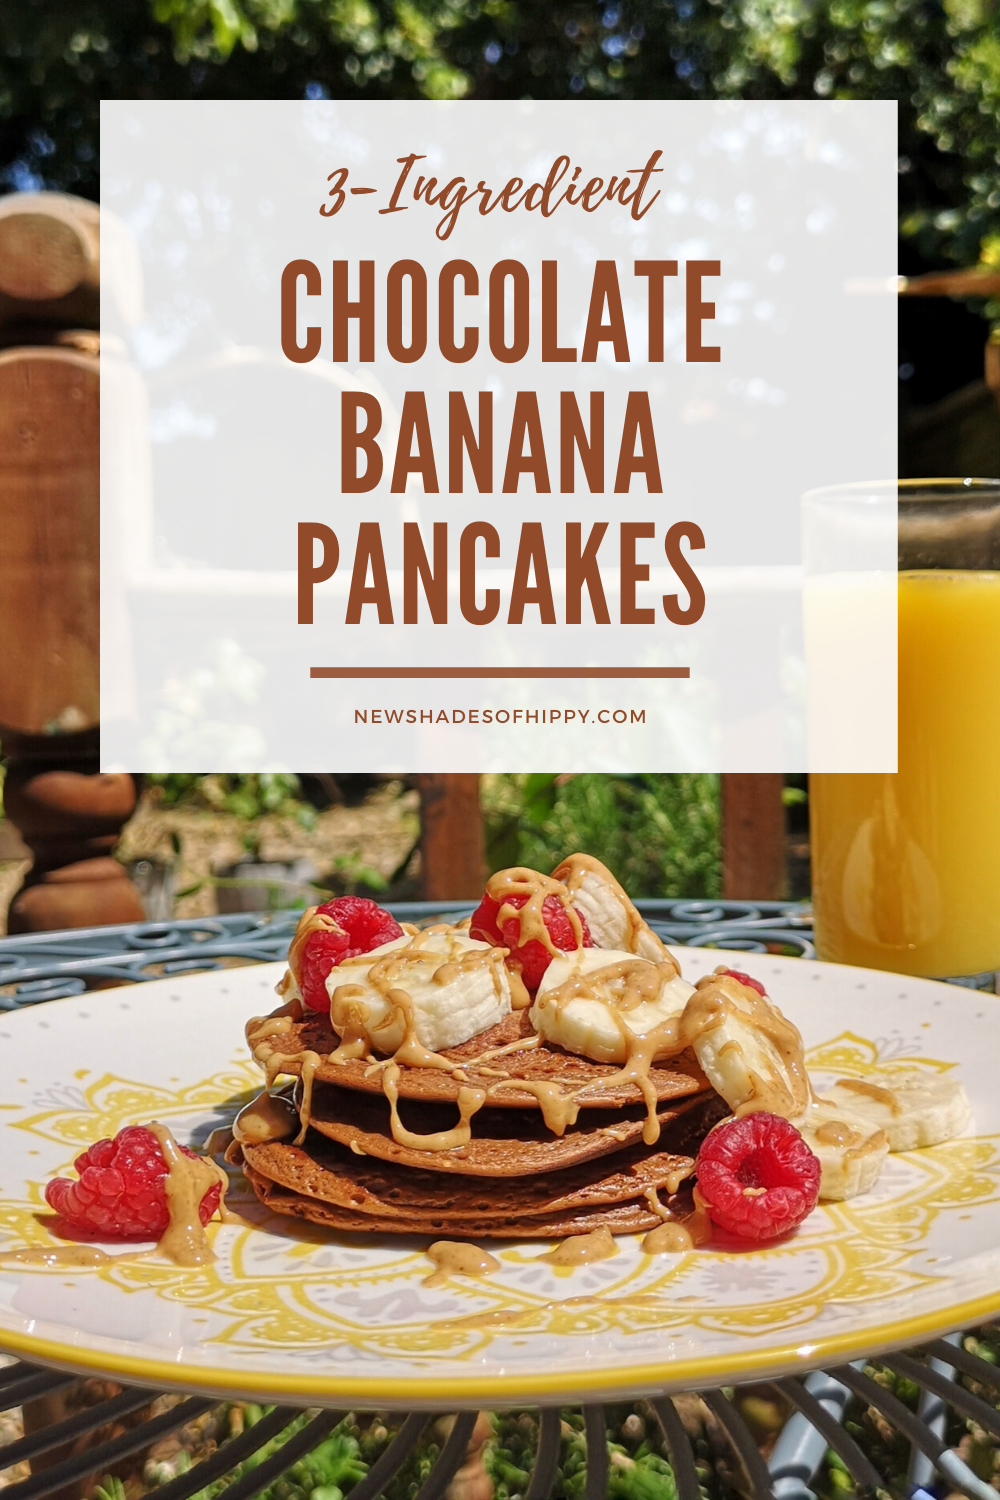 Pancakes on plate with raspberries and banana and text: 3 ingredient chocolate banana pancakes